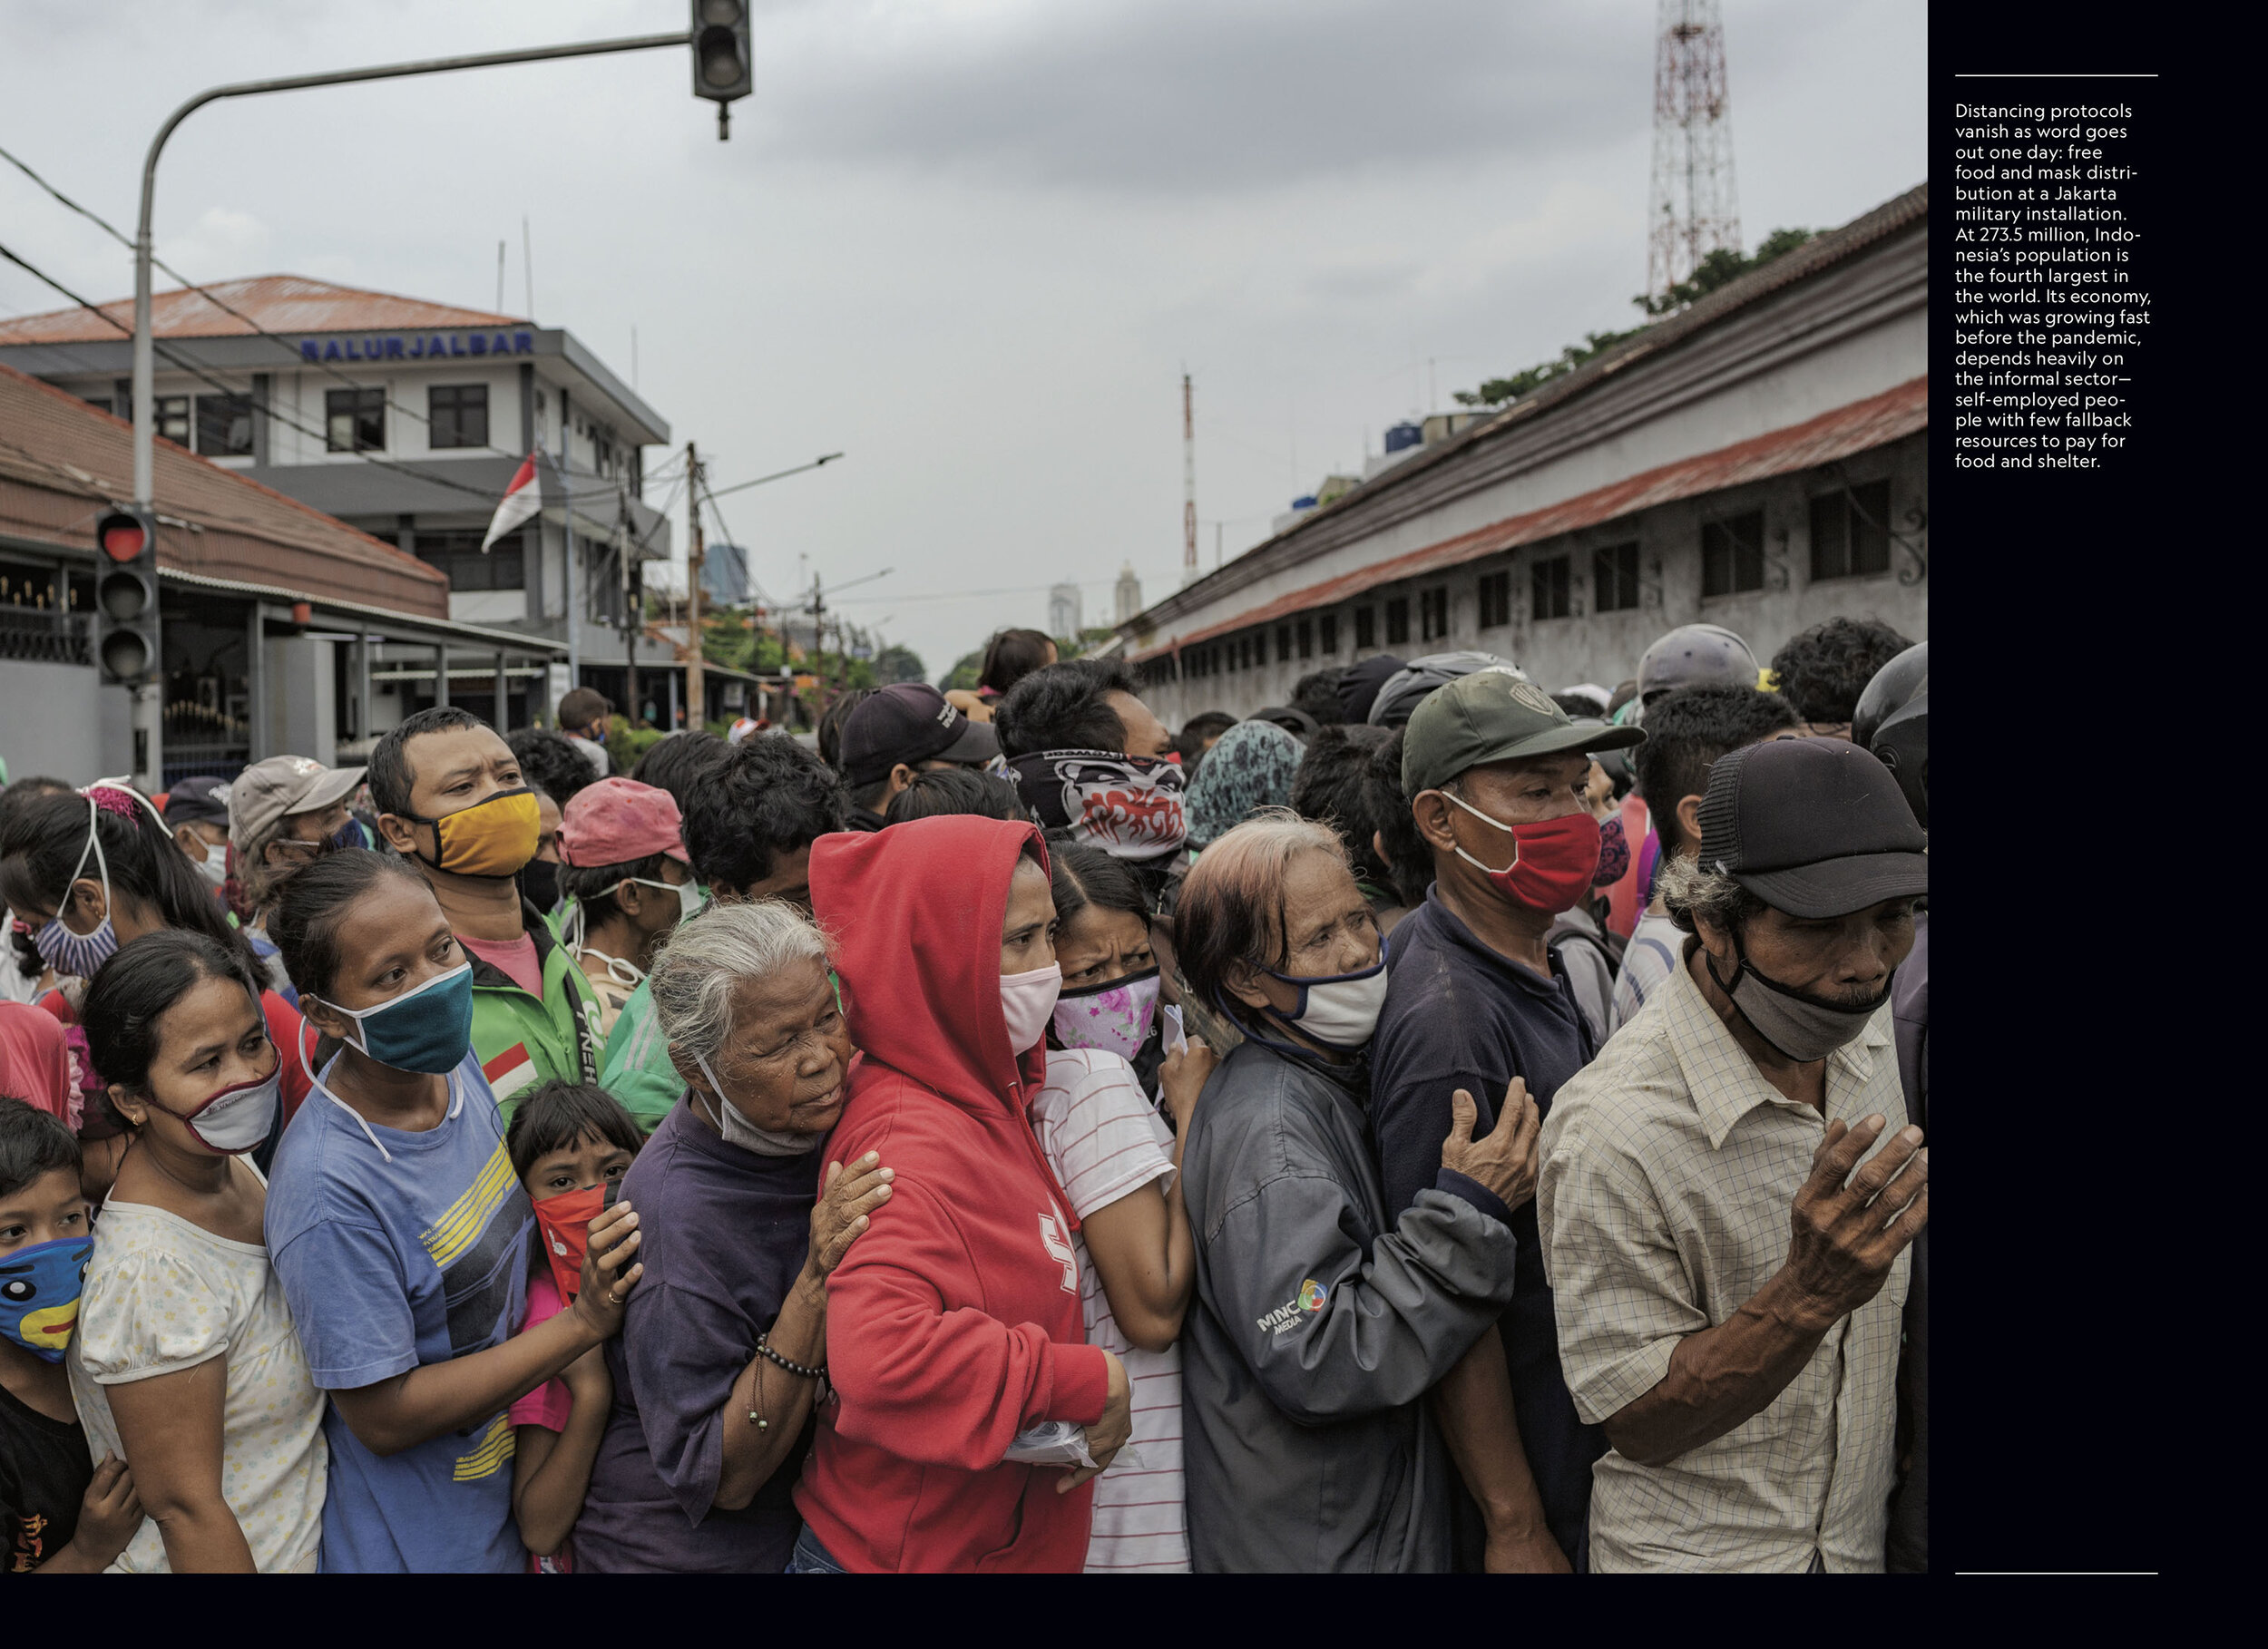  COVID-19 in Indonesia for National Geographic Magazine, November 2020 